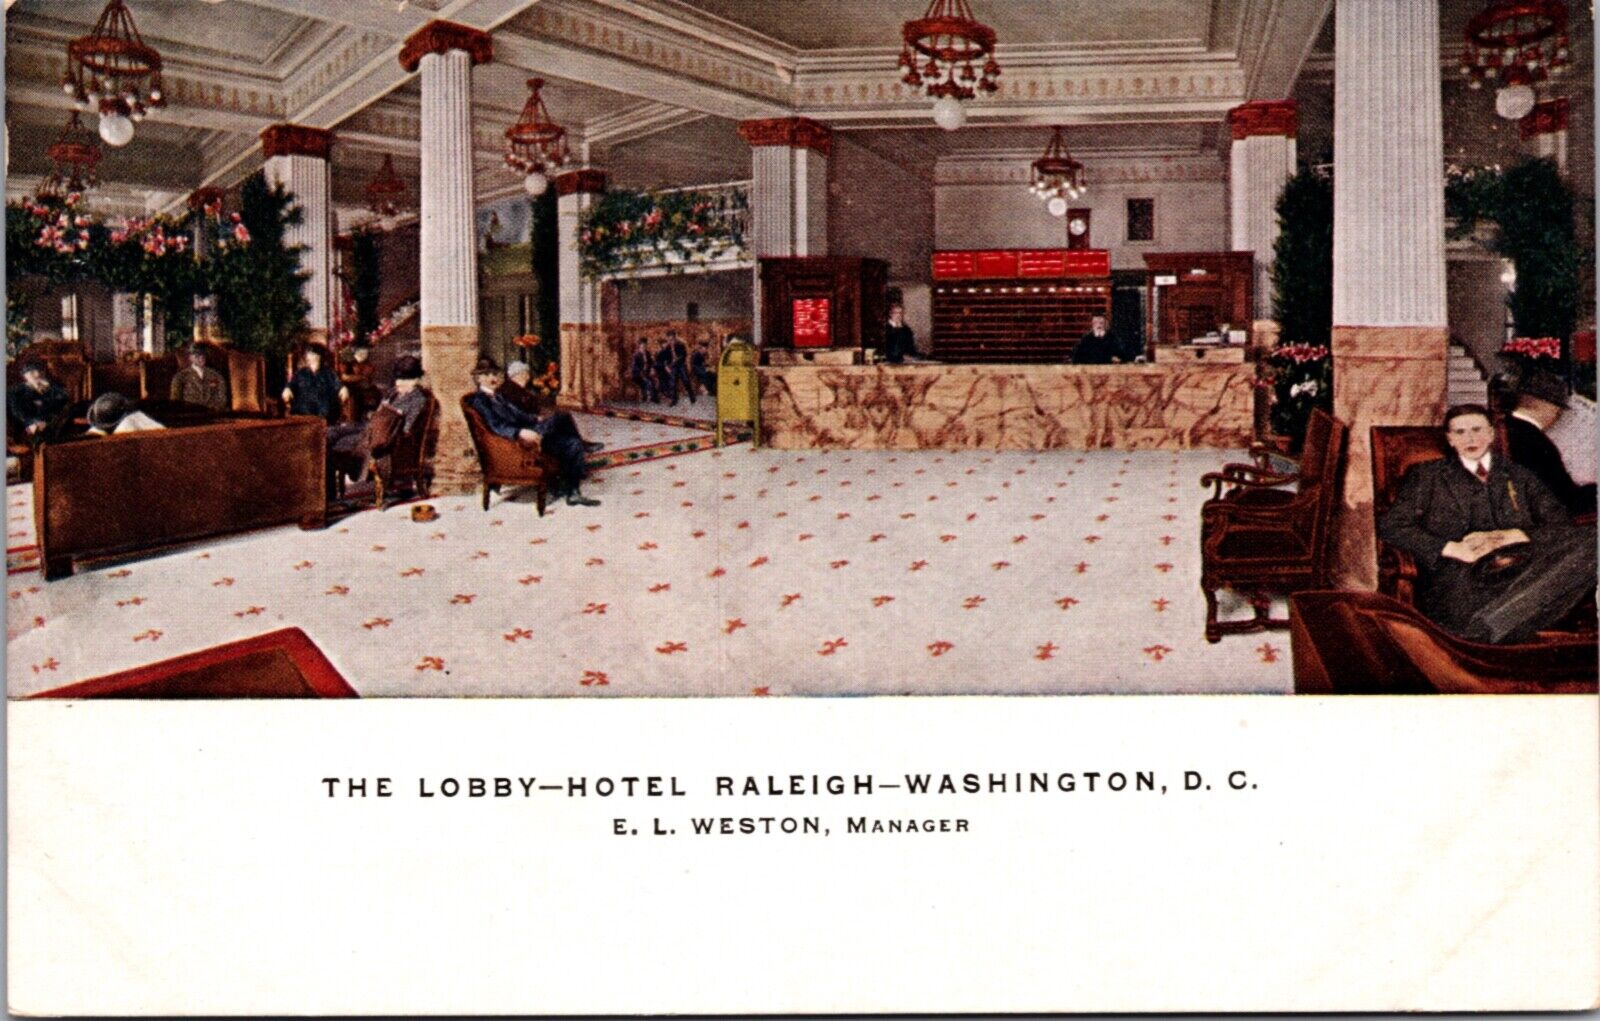 Postcard The Lobby at Hotel Raleigh in Washington, D.C.